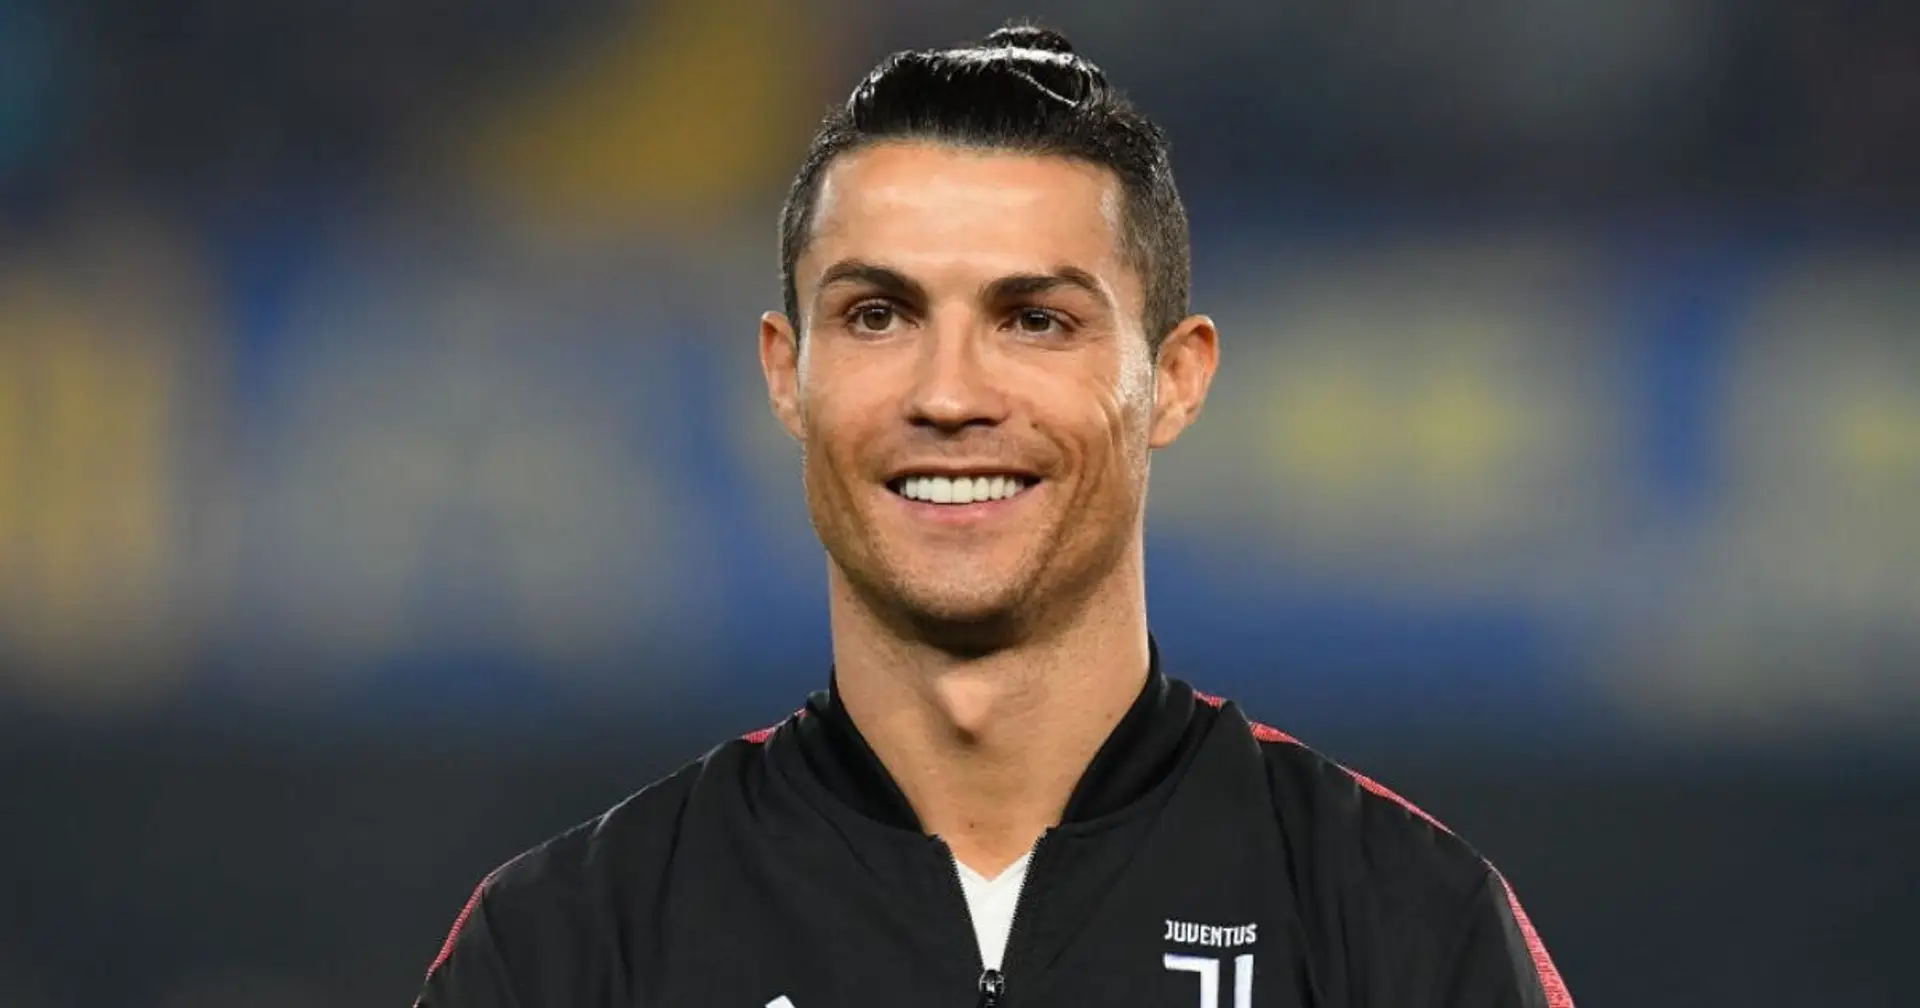 Cristiano Ronaldo told to seal Premier League return - but not to Man United